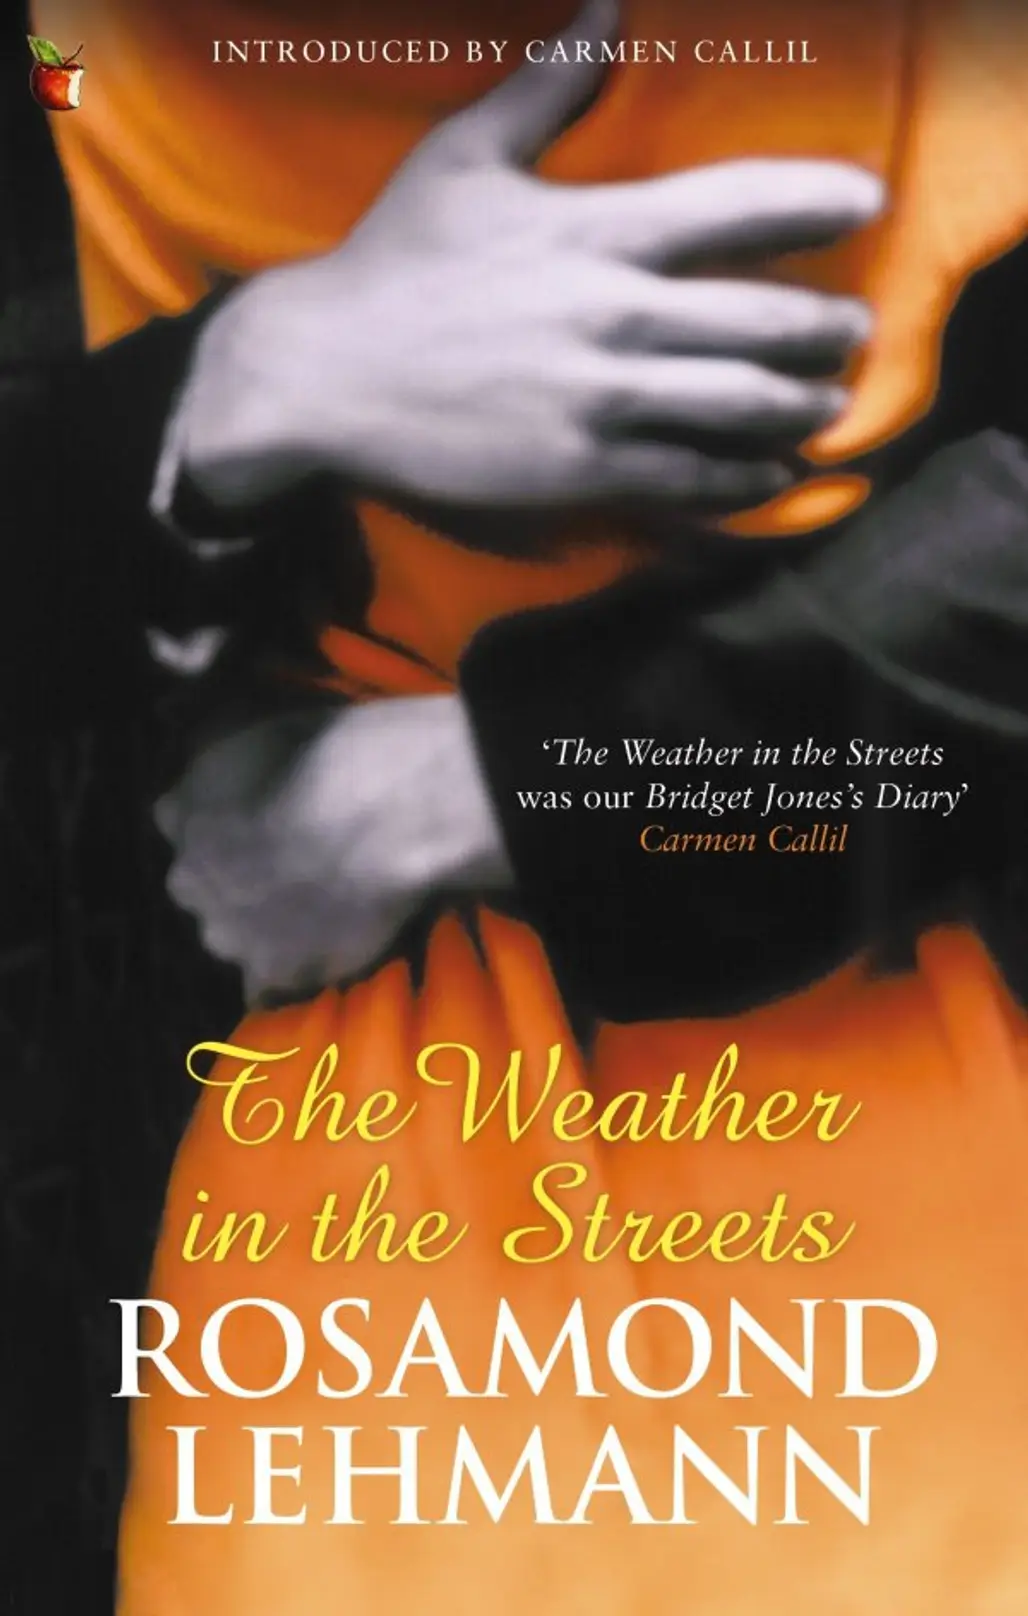 The Weather in the Streets –Rosamond Lehmann